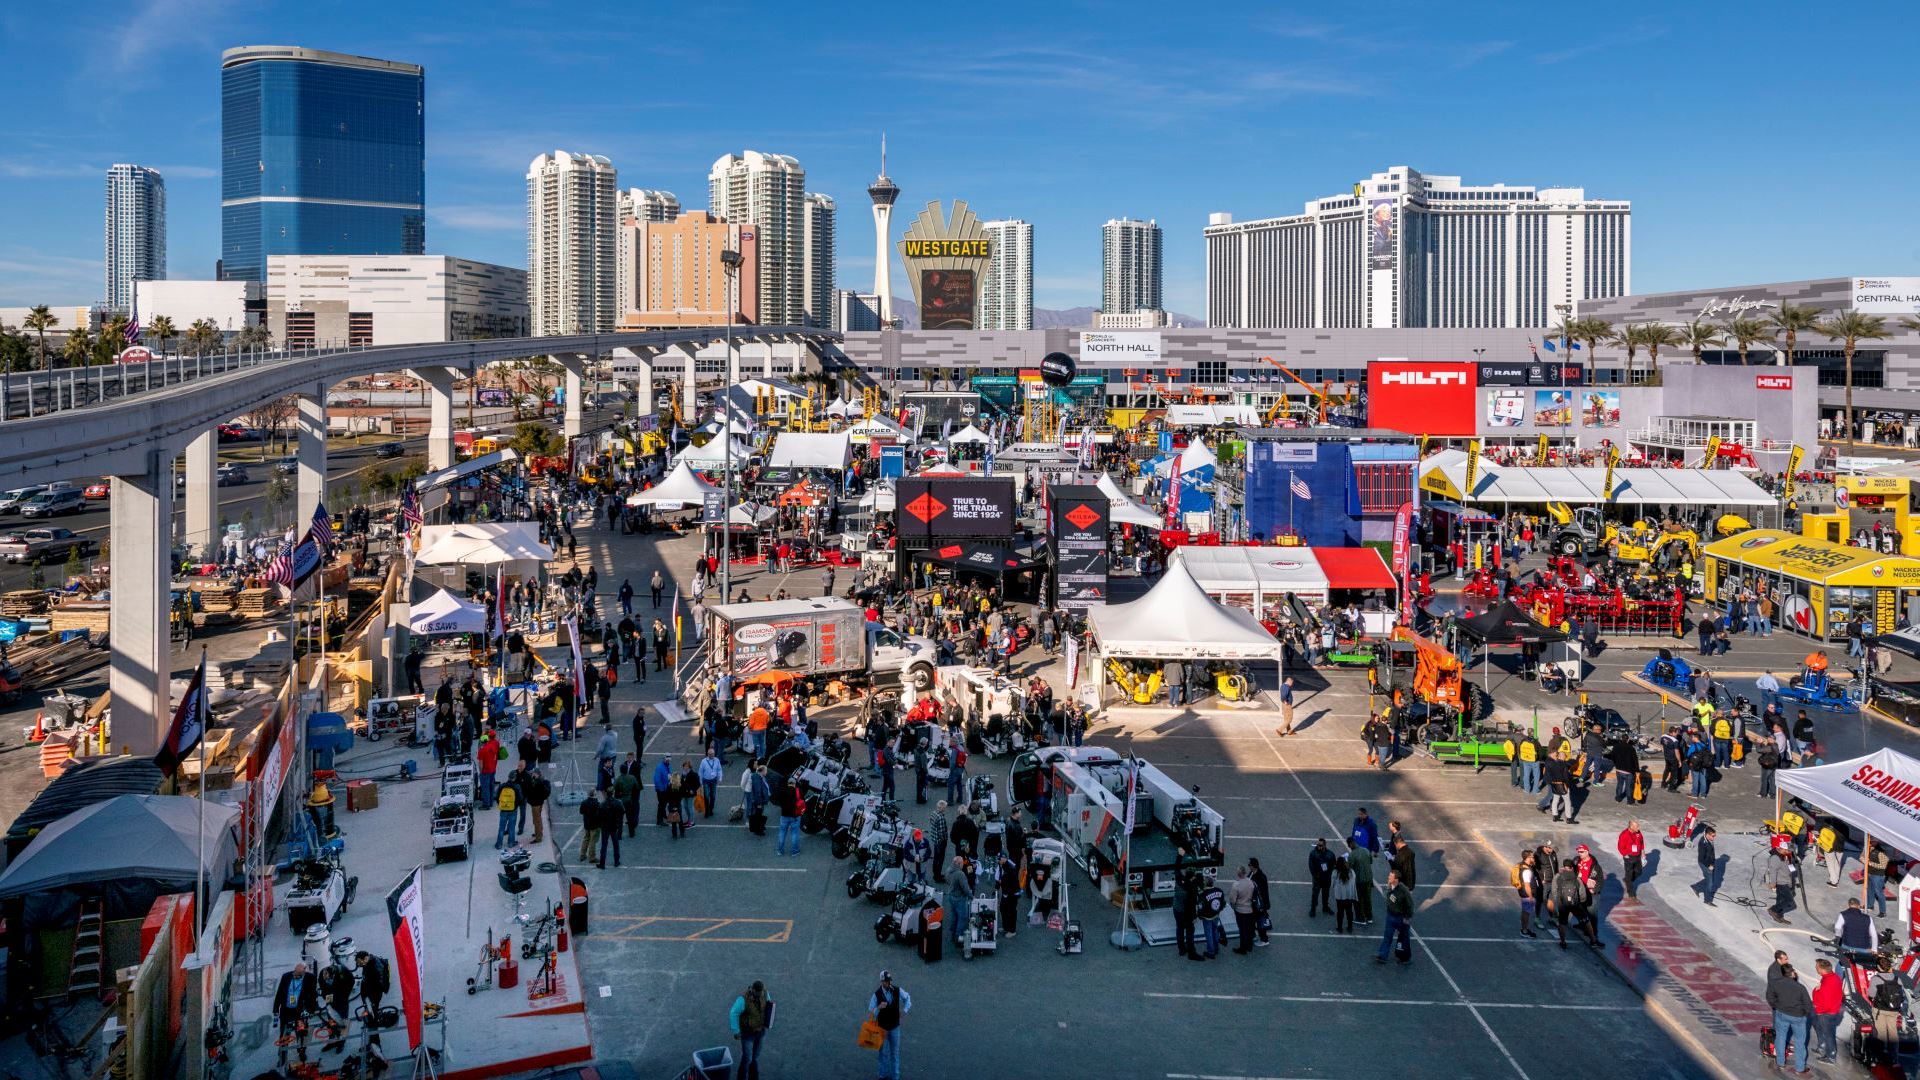 Las Vegas and Informa Markets Prepare to Host Safe and Successful Citywide Events in Las Vegas, Beginning with World of